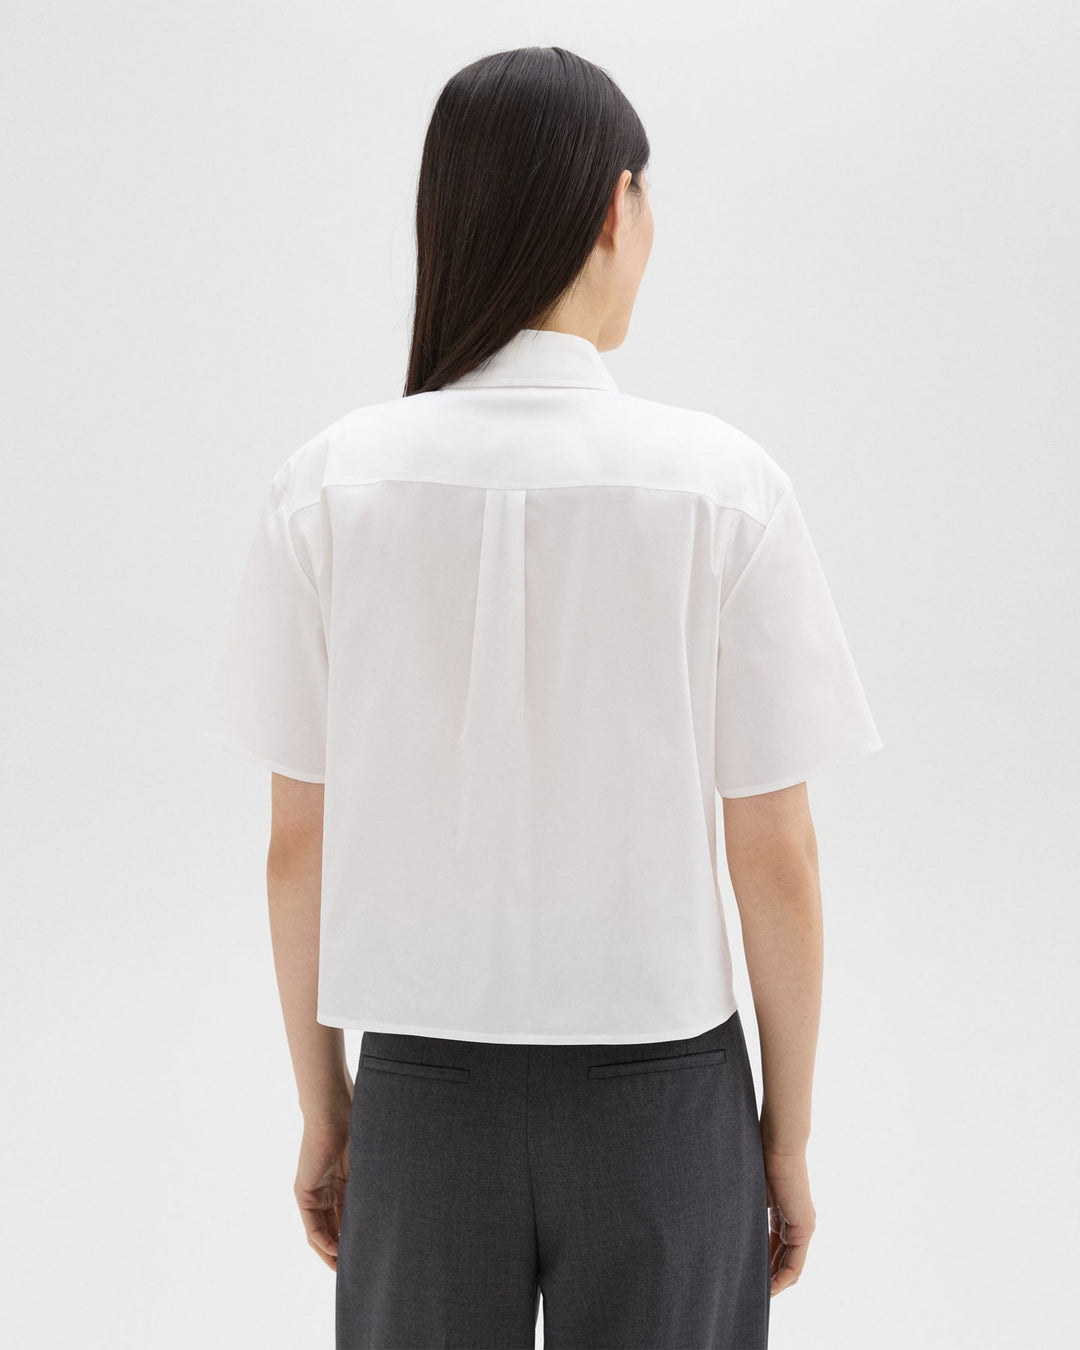 Cropped Short-Sleeve Shirt in Good Cotton